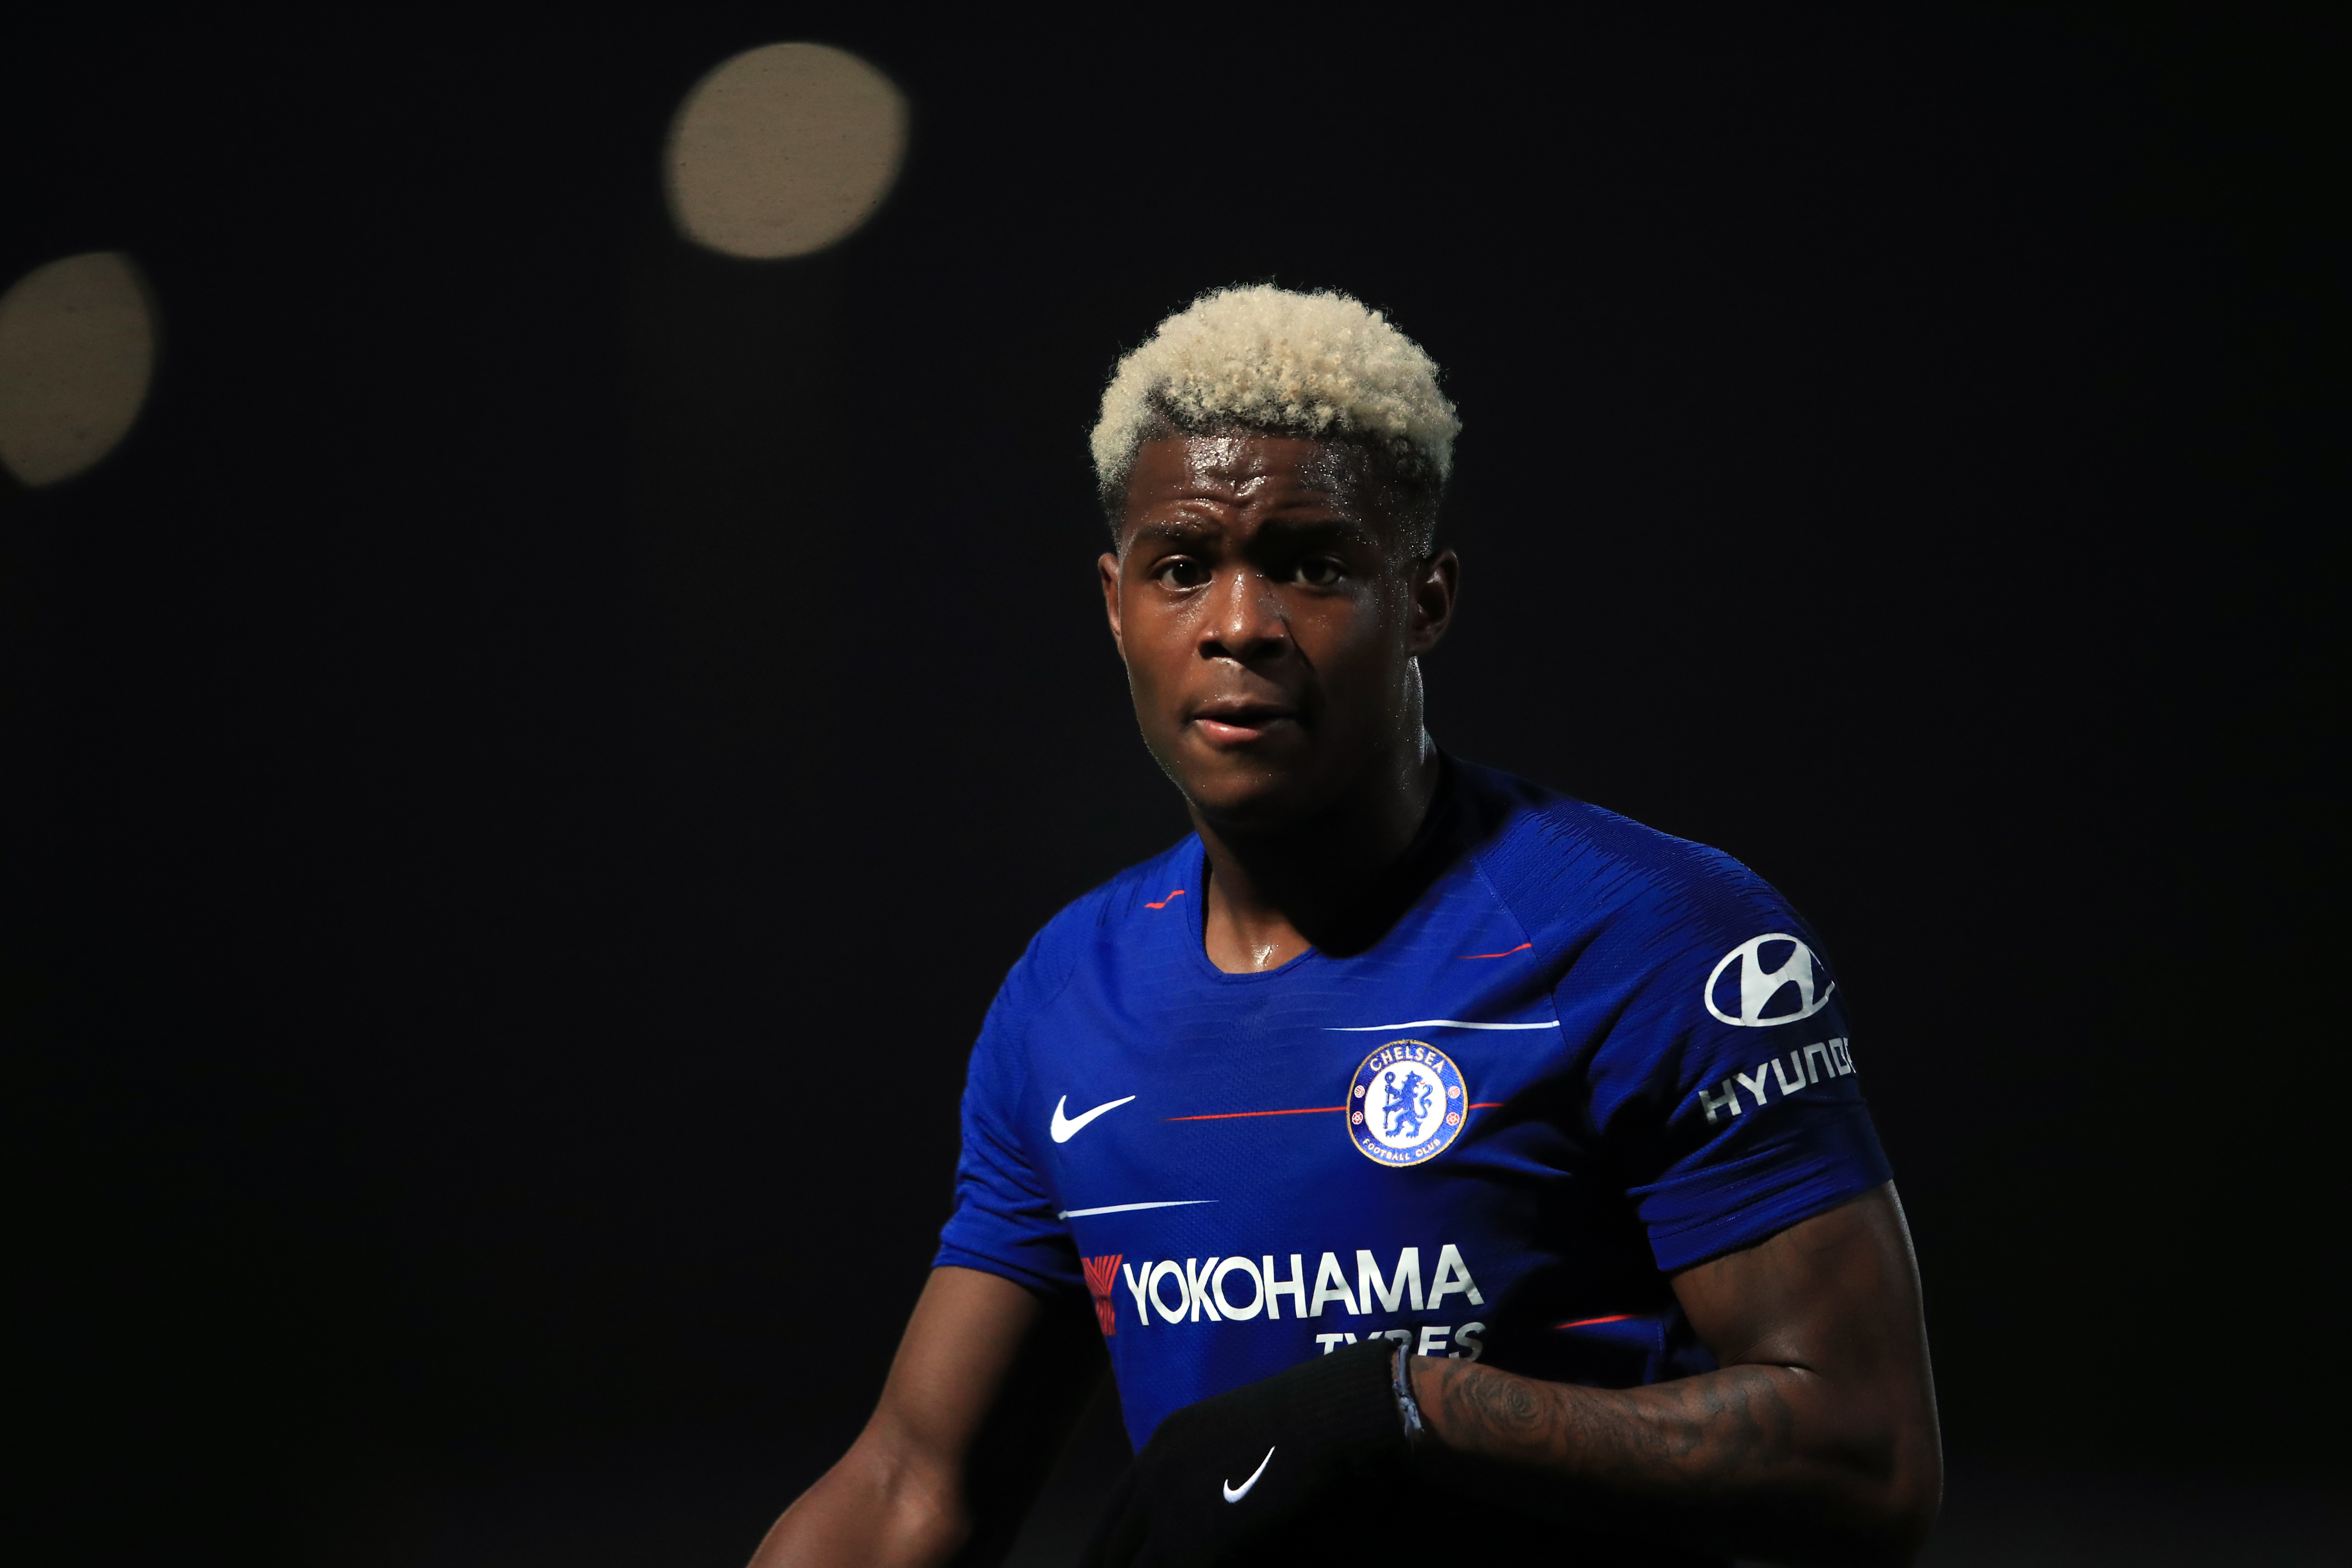 STEVENAGE, ENGLAND - MARCH 01: Daishawn Redan of Chelsea during the Premier League 2 match between Tottenham Hotspur and  Chelsea  at The Lamex Stadium on March 01, 2019 in Stevenage, England. (Photo by Marc Atkins/Getty Images)